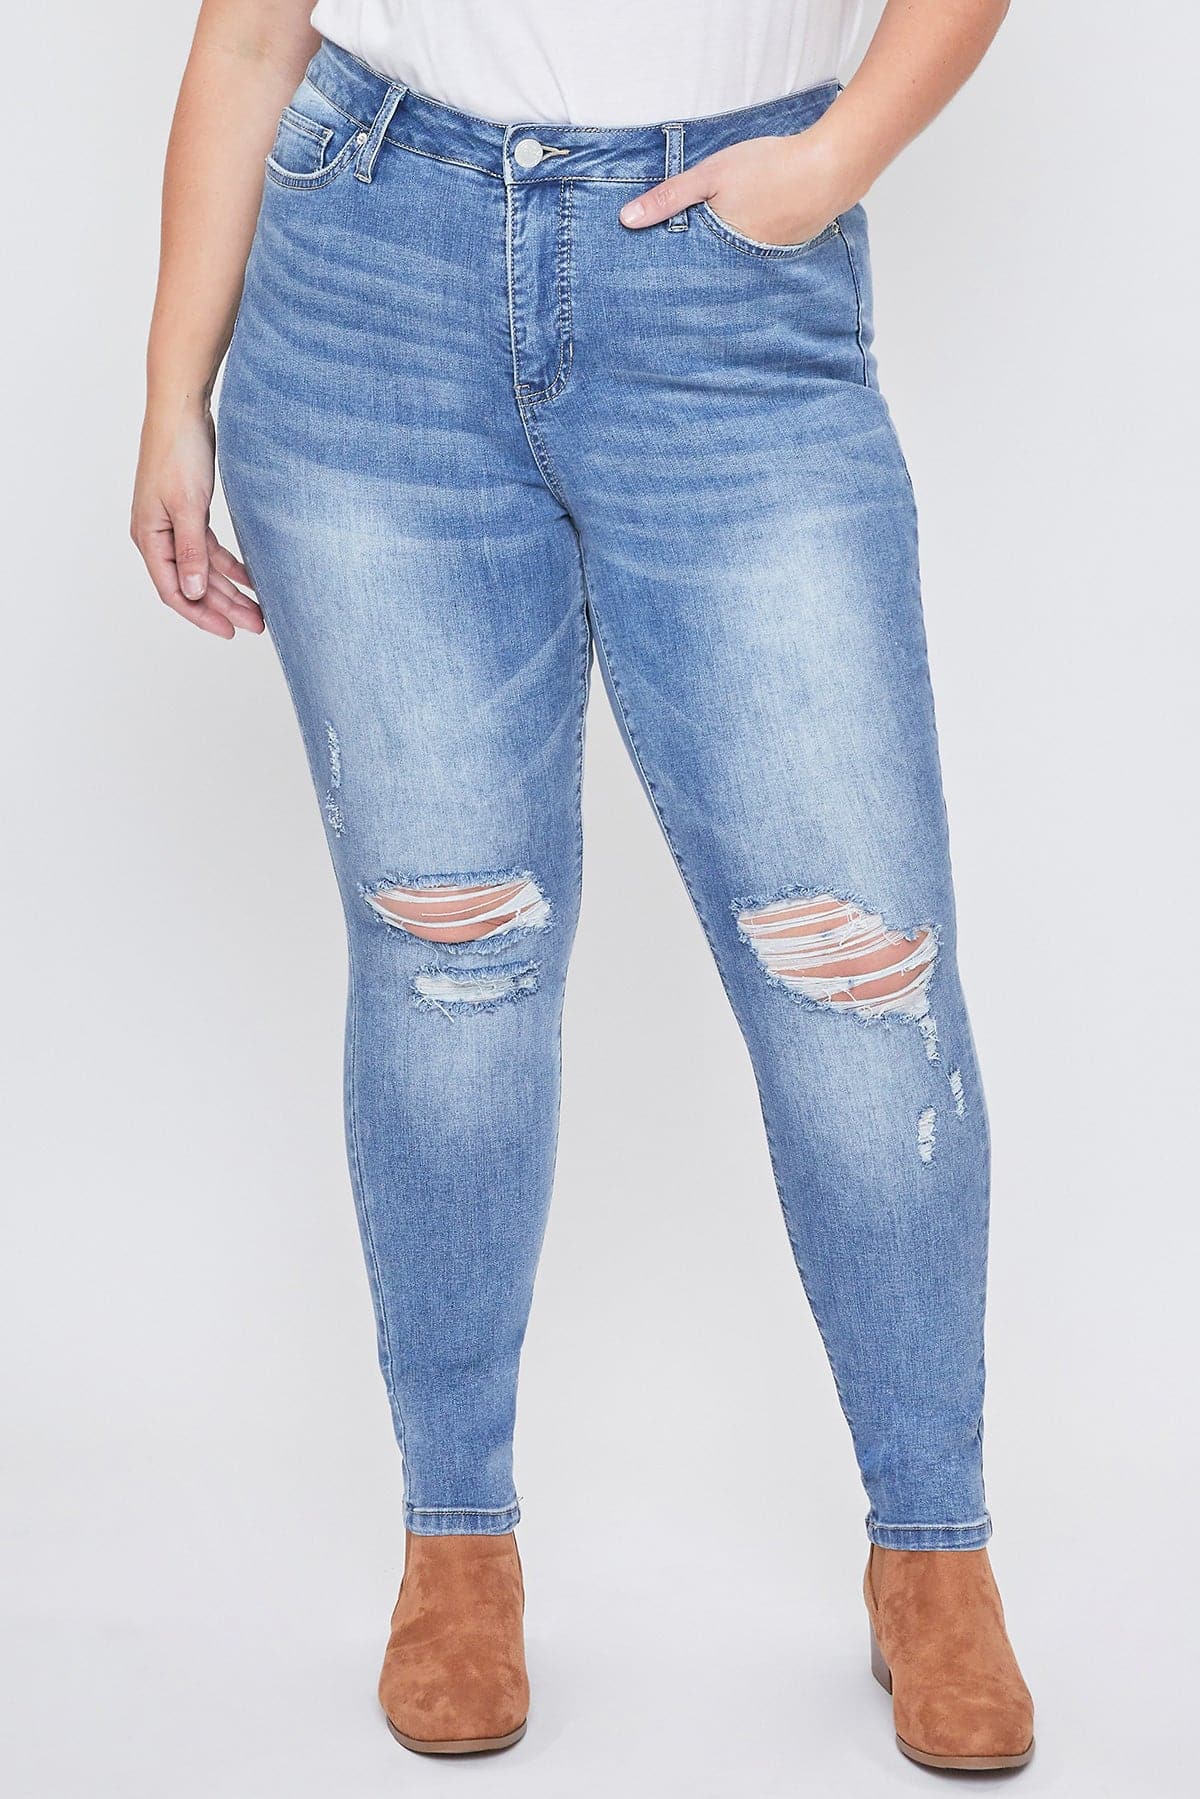 Women's Plus Size Essential High Rise Skinny Jeans